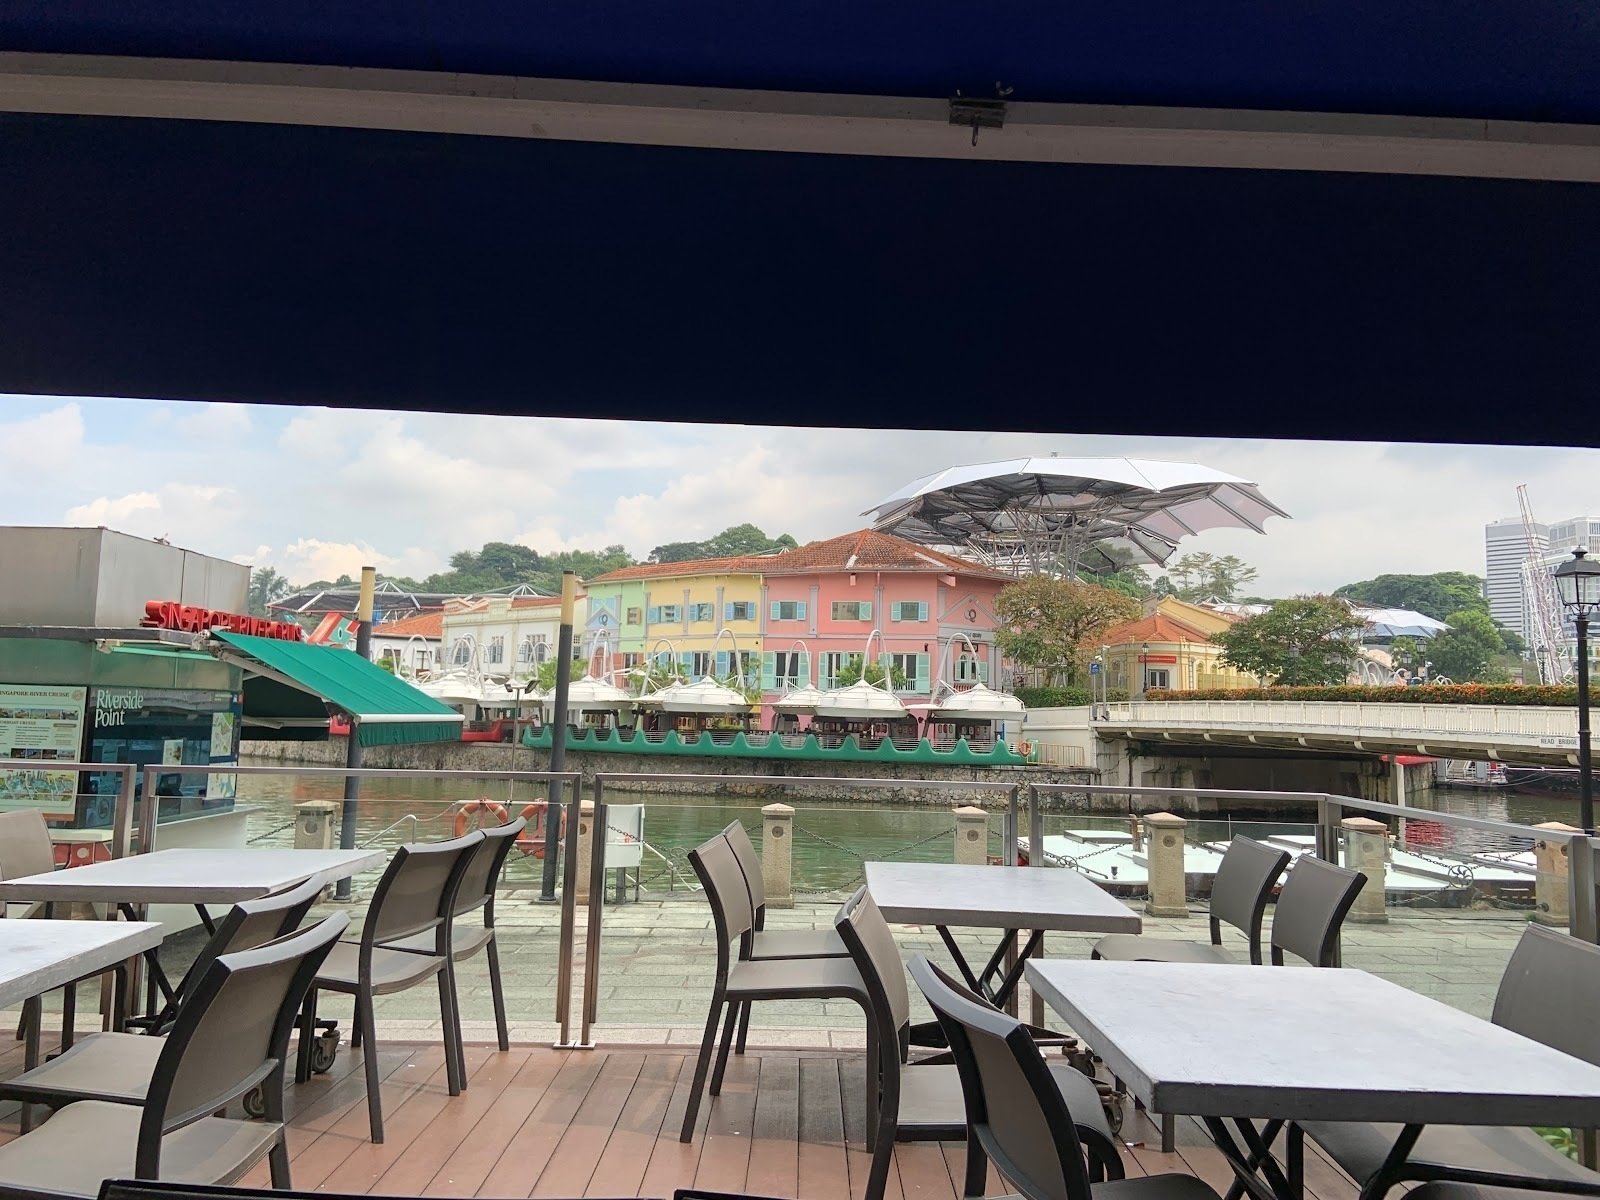 <span class="translation_missing" title="translation missing: en.meta.location_title, location_name: JUMBO Seafood - Riverside Point, city: Singapore">Location Title</span>